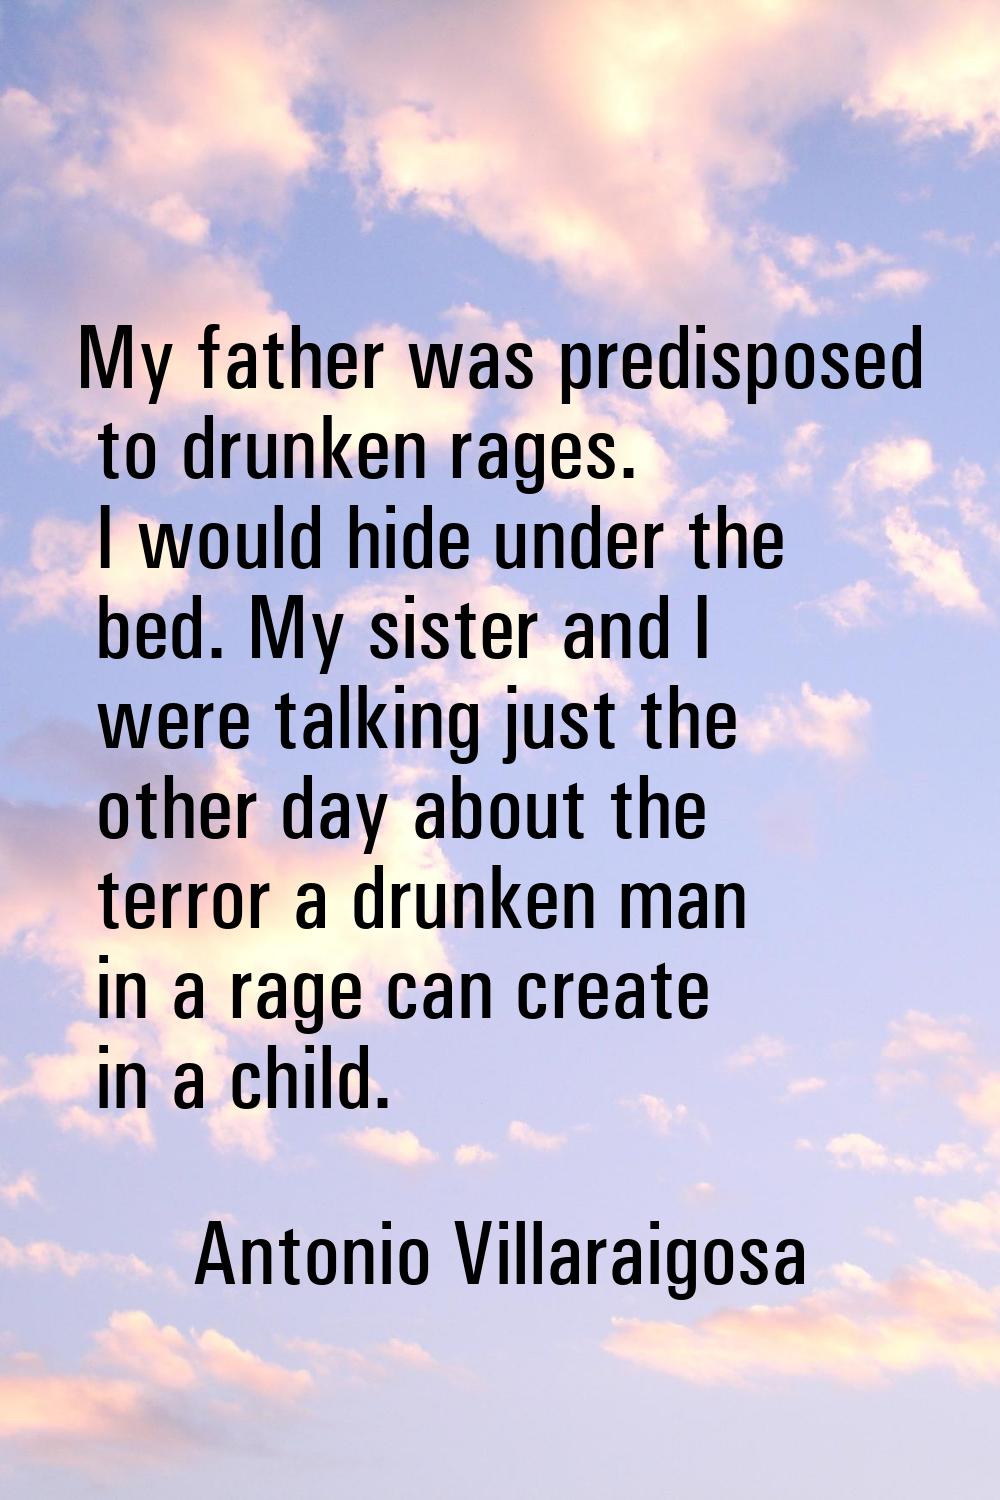 My father was predisposed to drunken rages. I would hide under the bed. My sister and I were talkin